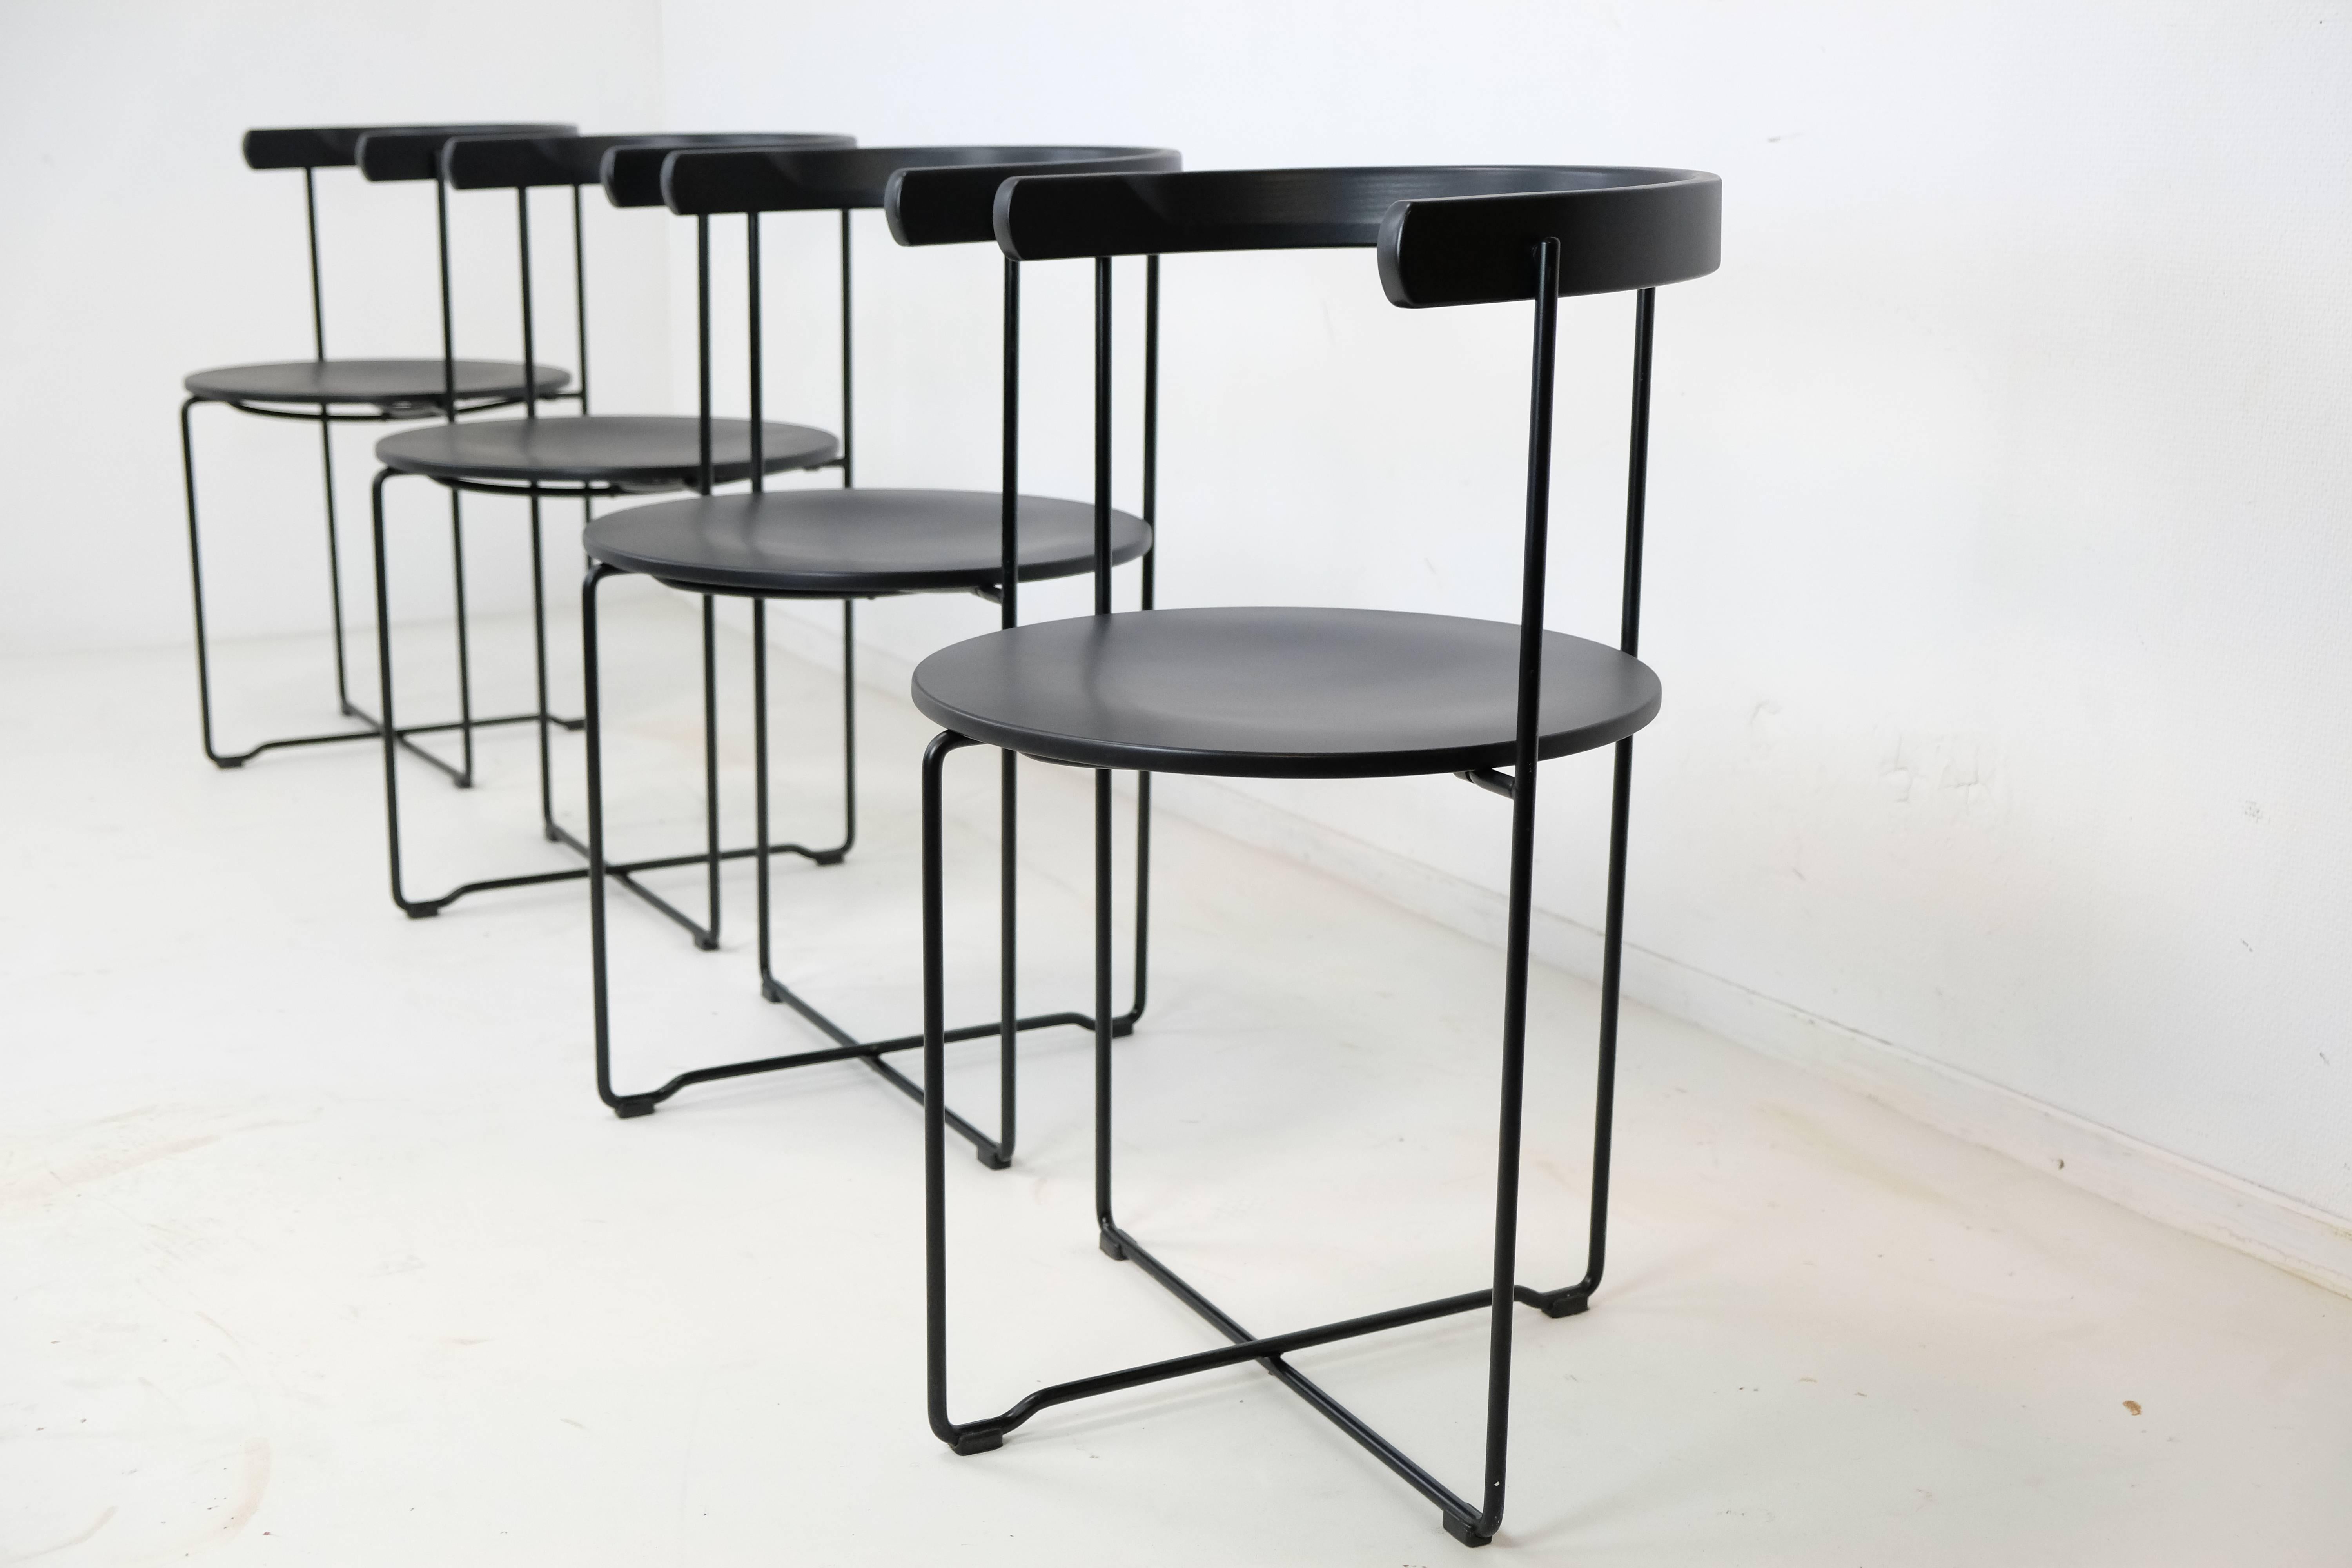 A set of four wood and tubular steel folding chairs designed in 1981 by Valdimar Hardarson for the Kusch and Co.
Ingeniously designed black lacquered wood and black enamel metal frame. The chairs store flat by open into perhaps the chicest folding